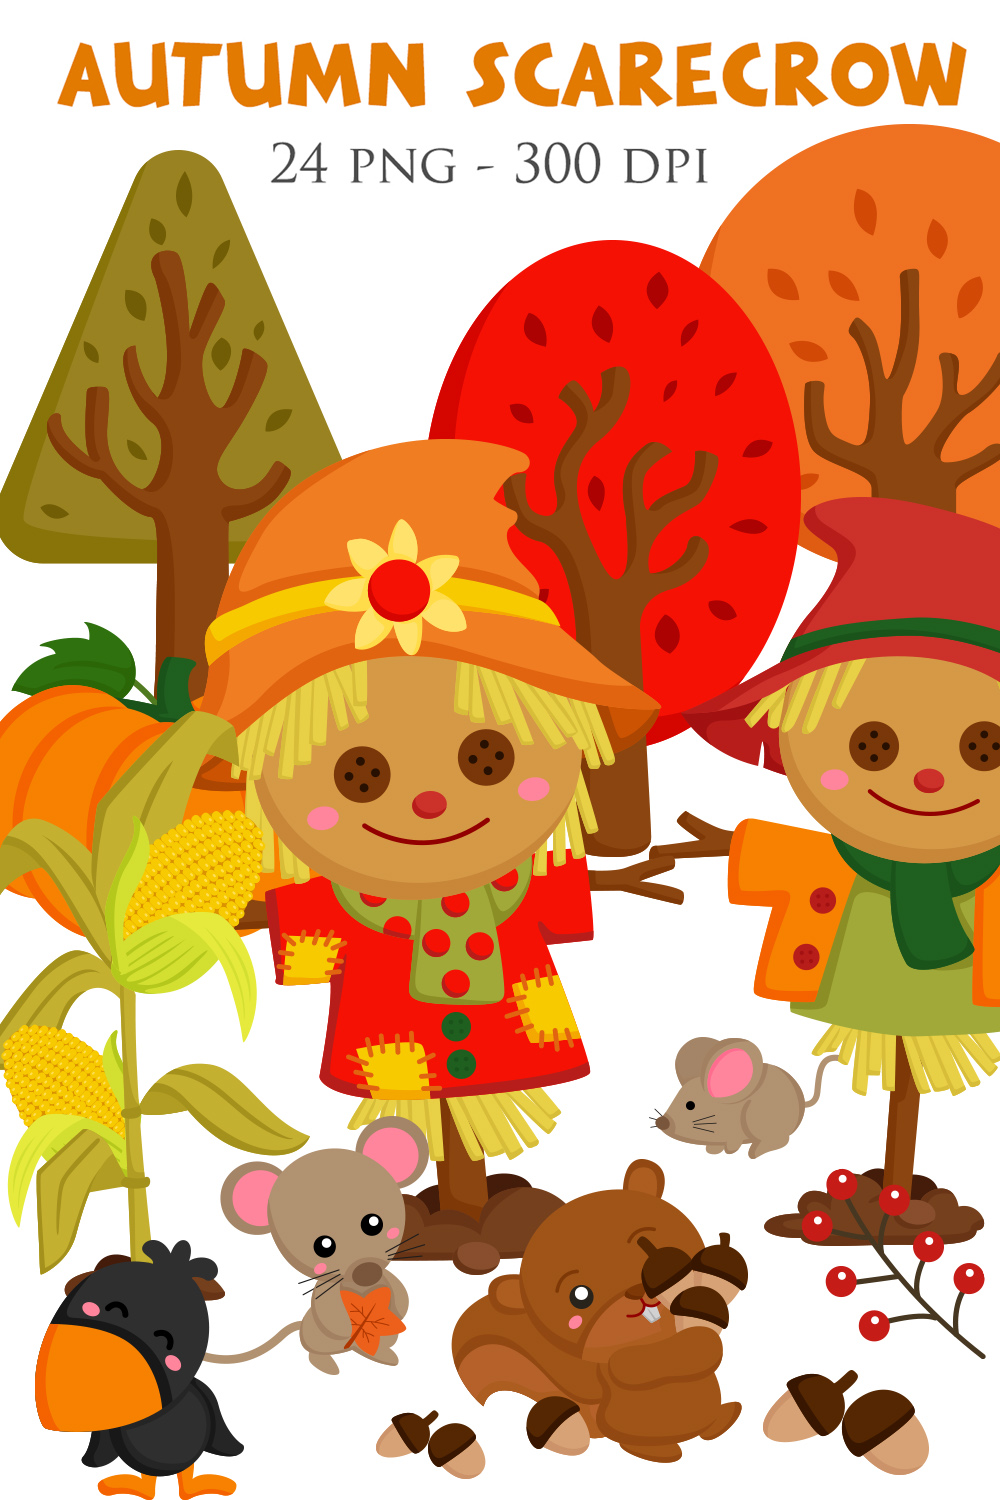 Cute Autumn Scarecrow Doll Nature Weather with Animals Beaver Raven Mouse Pumpkin Tree Leaves Cartoon Illustration Vector Clipart pinterest preview image.